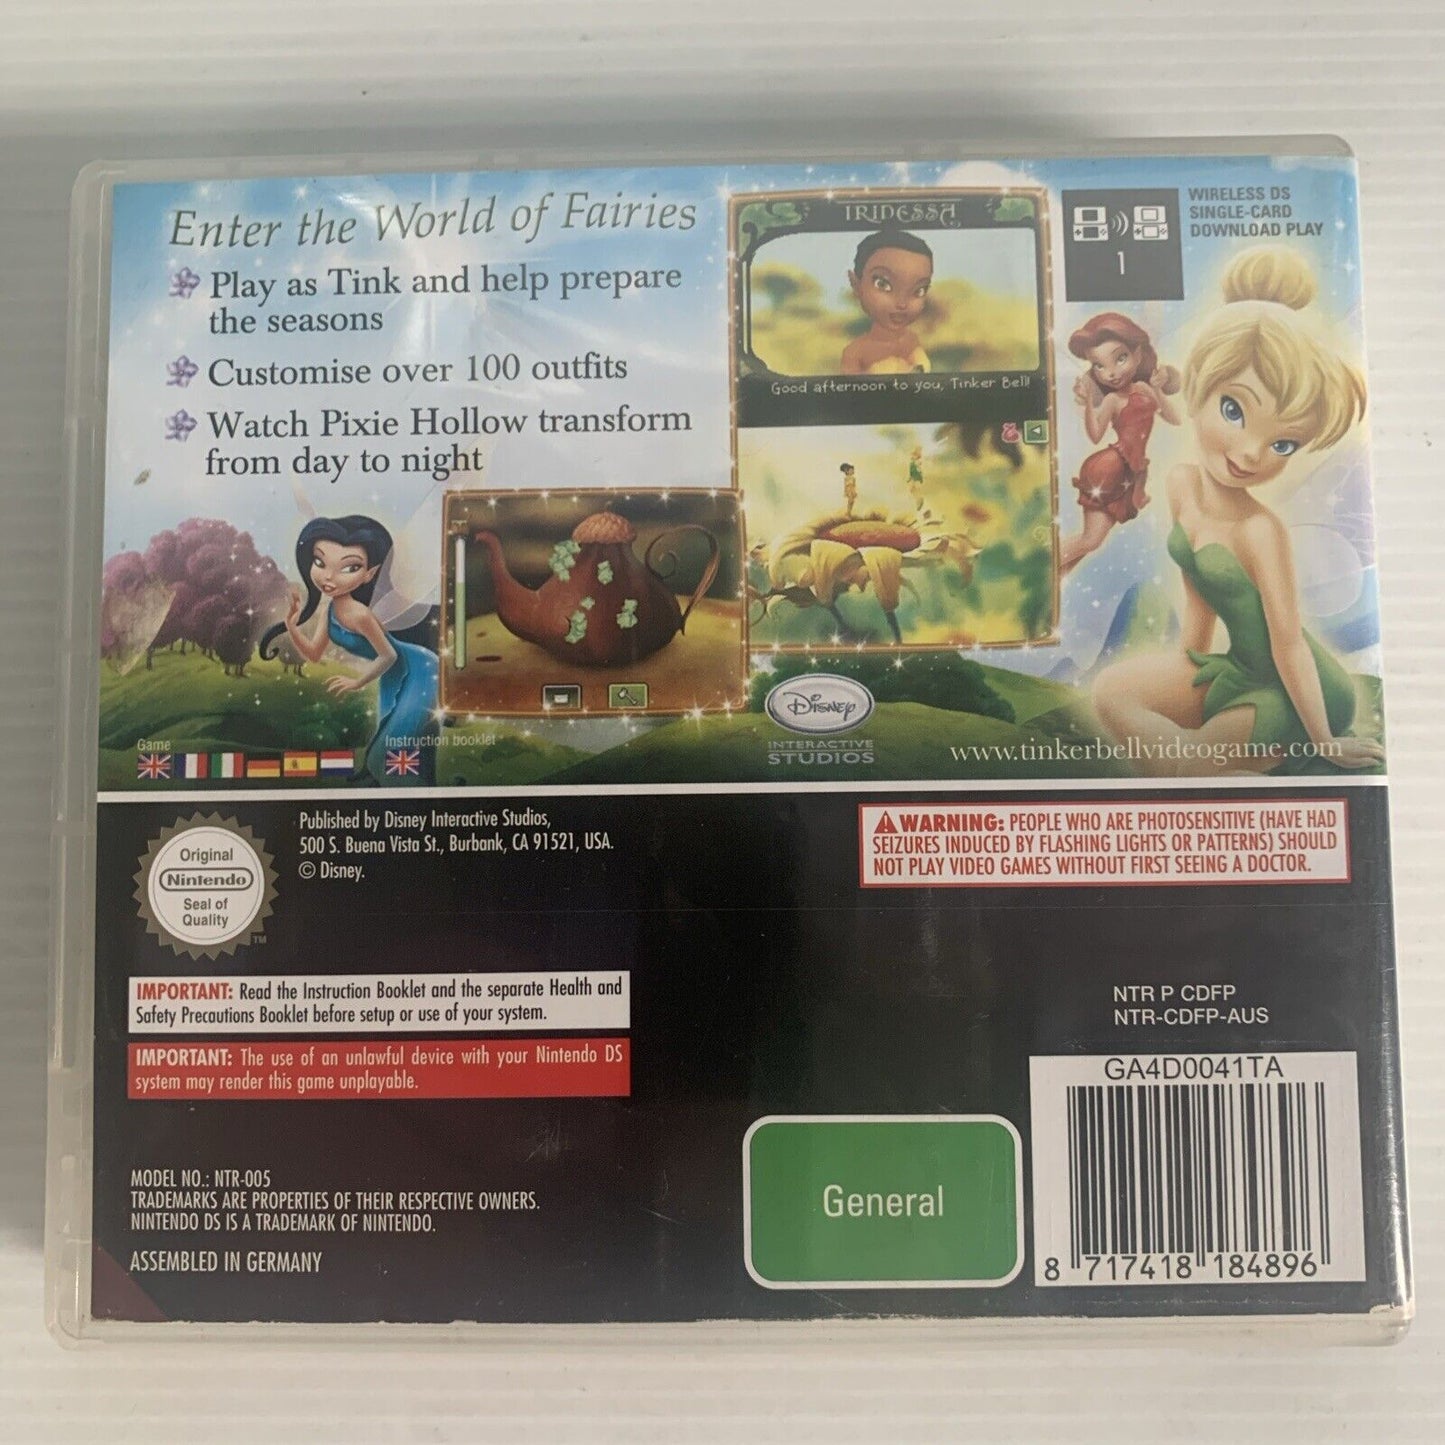 Tinkerbell Nintendo DS Game